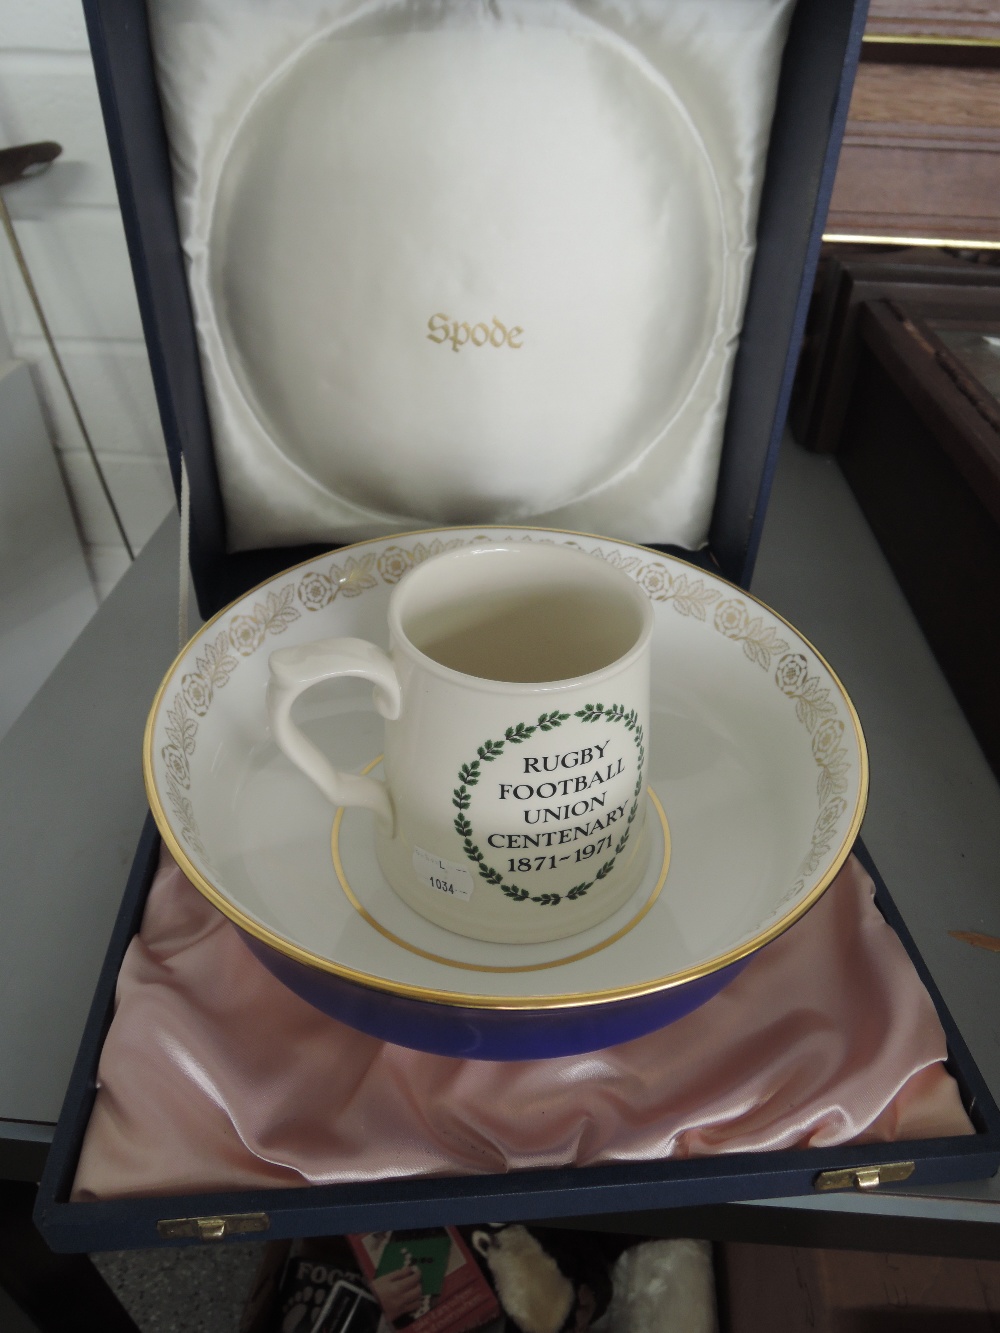 A Spode bowl and ceramic tankard commemorating The Rugby Football Union Centenary 1871-1971 (bowl